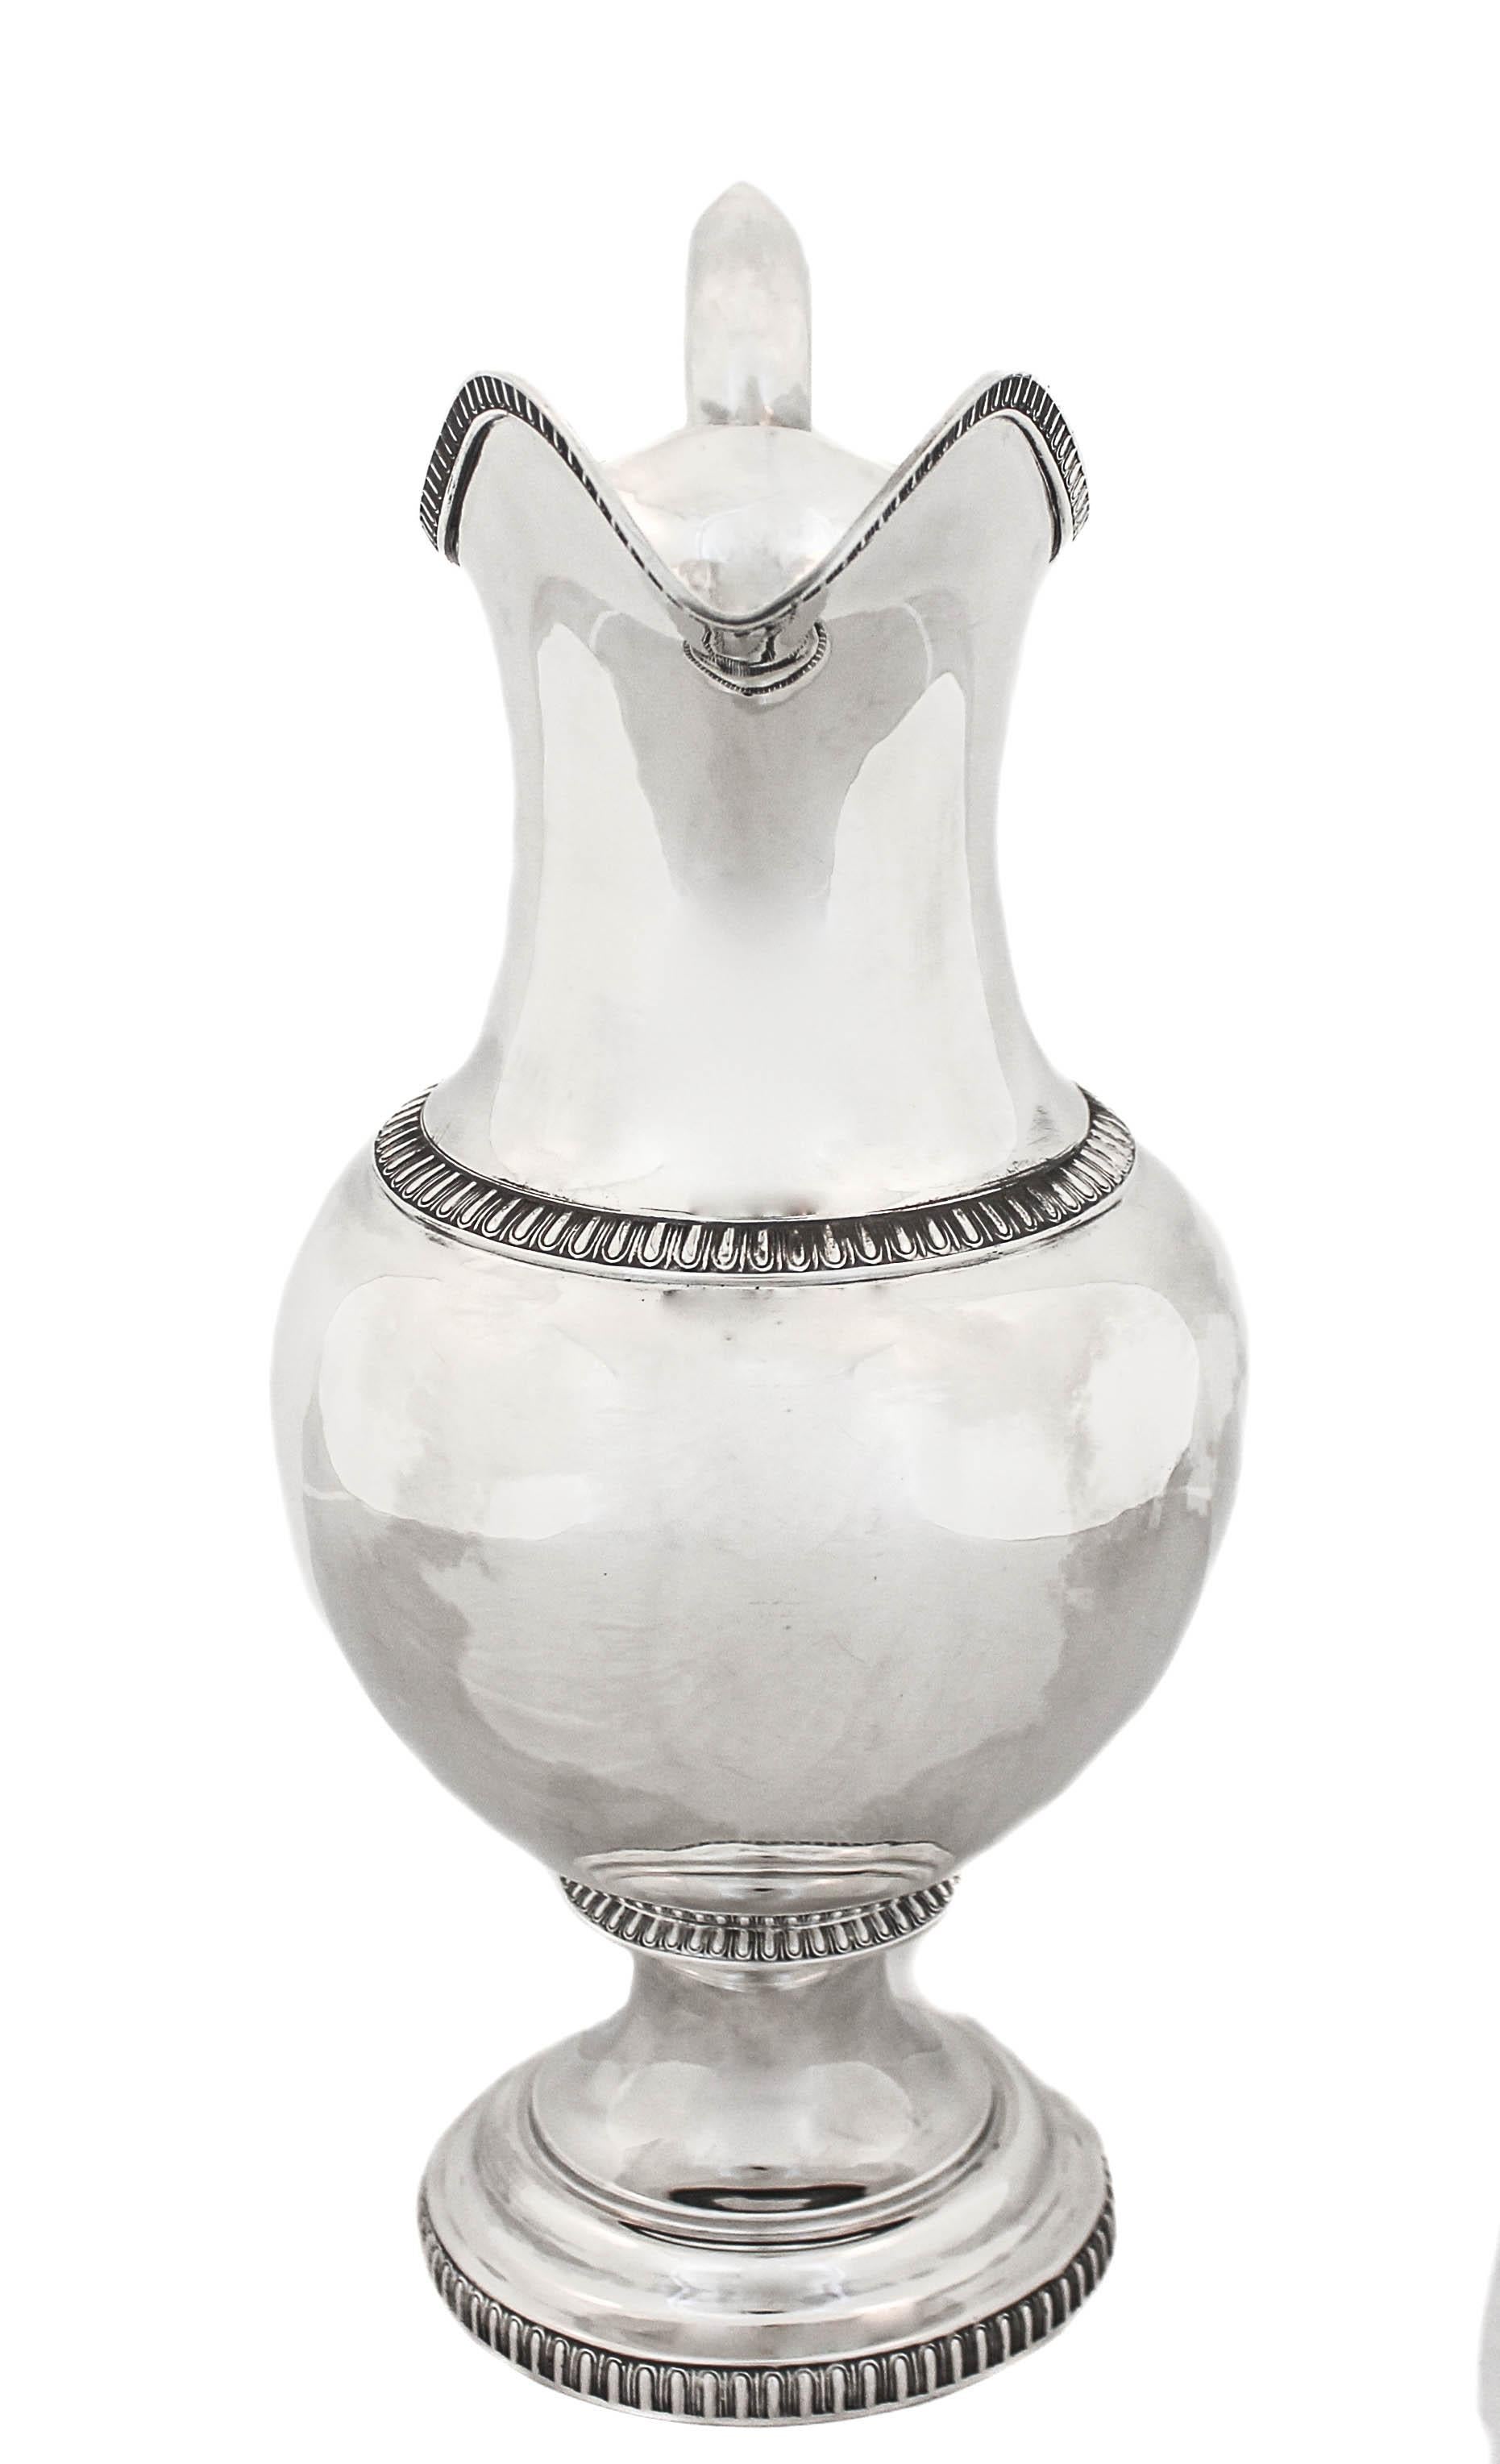 This one hundred and sixty four year old sterling silver ewer (aka water pitcher) was made before the American Civil War. President James Buchanan was in office and sterling silver hollowware was only used by the elite. This is a classic example of